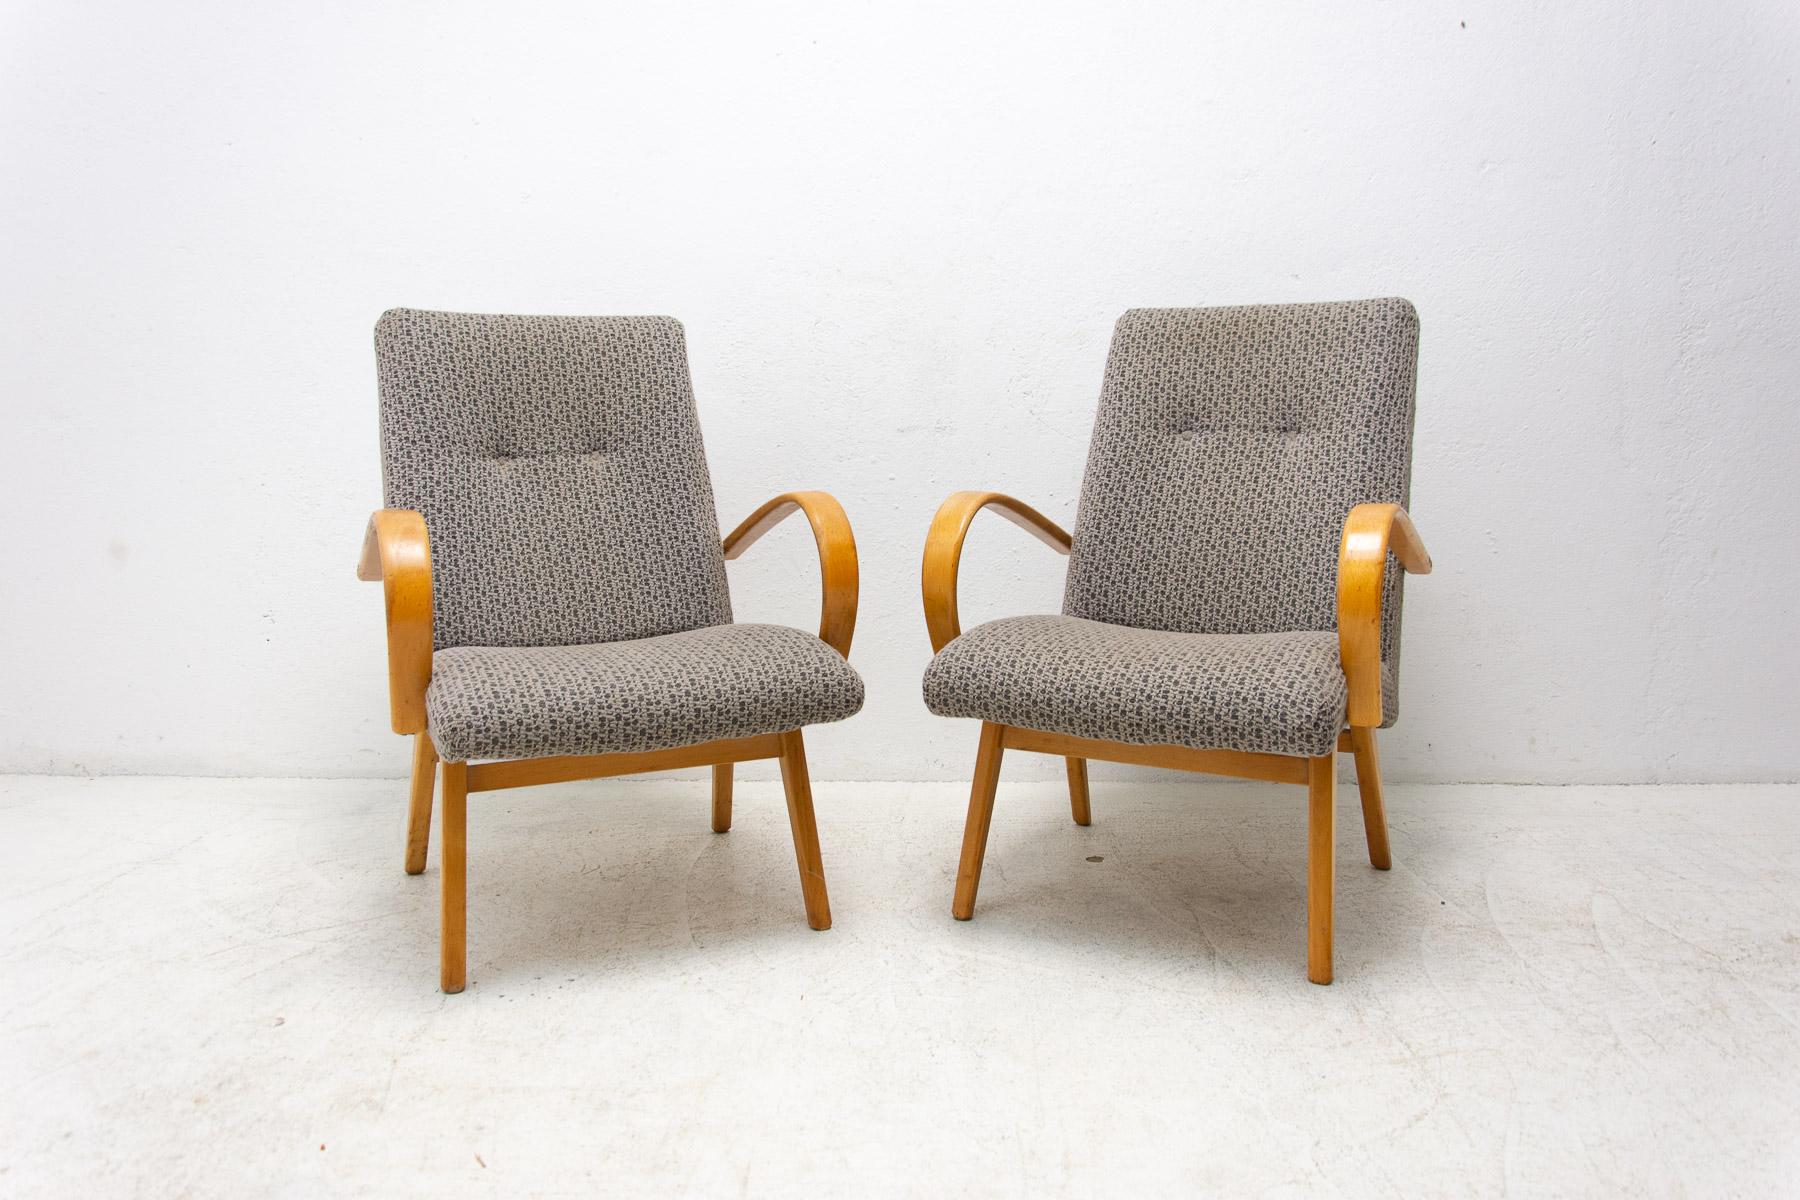 These bentwood armchairs were designed by Jaroslav Šmídek and made in the former Czechoslovakia in the 1960´s.

They are in very good Vintage condition, showing slight signs of age and using

Made of beech wood.

Price is for the pair.

 

Height: